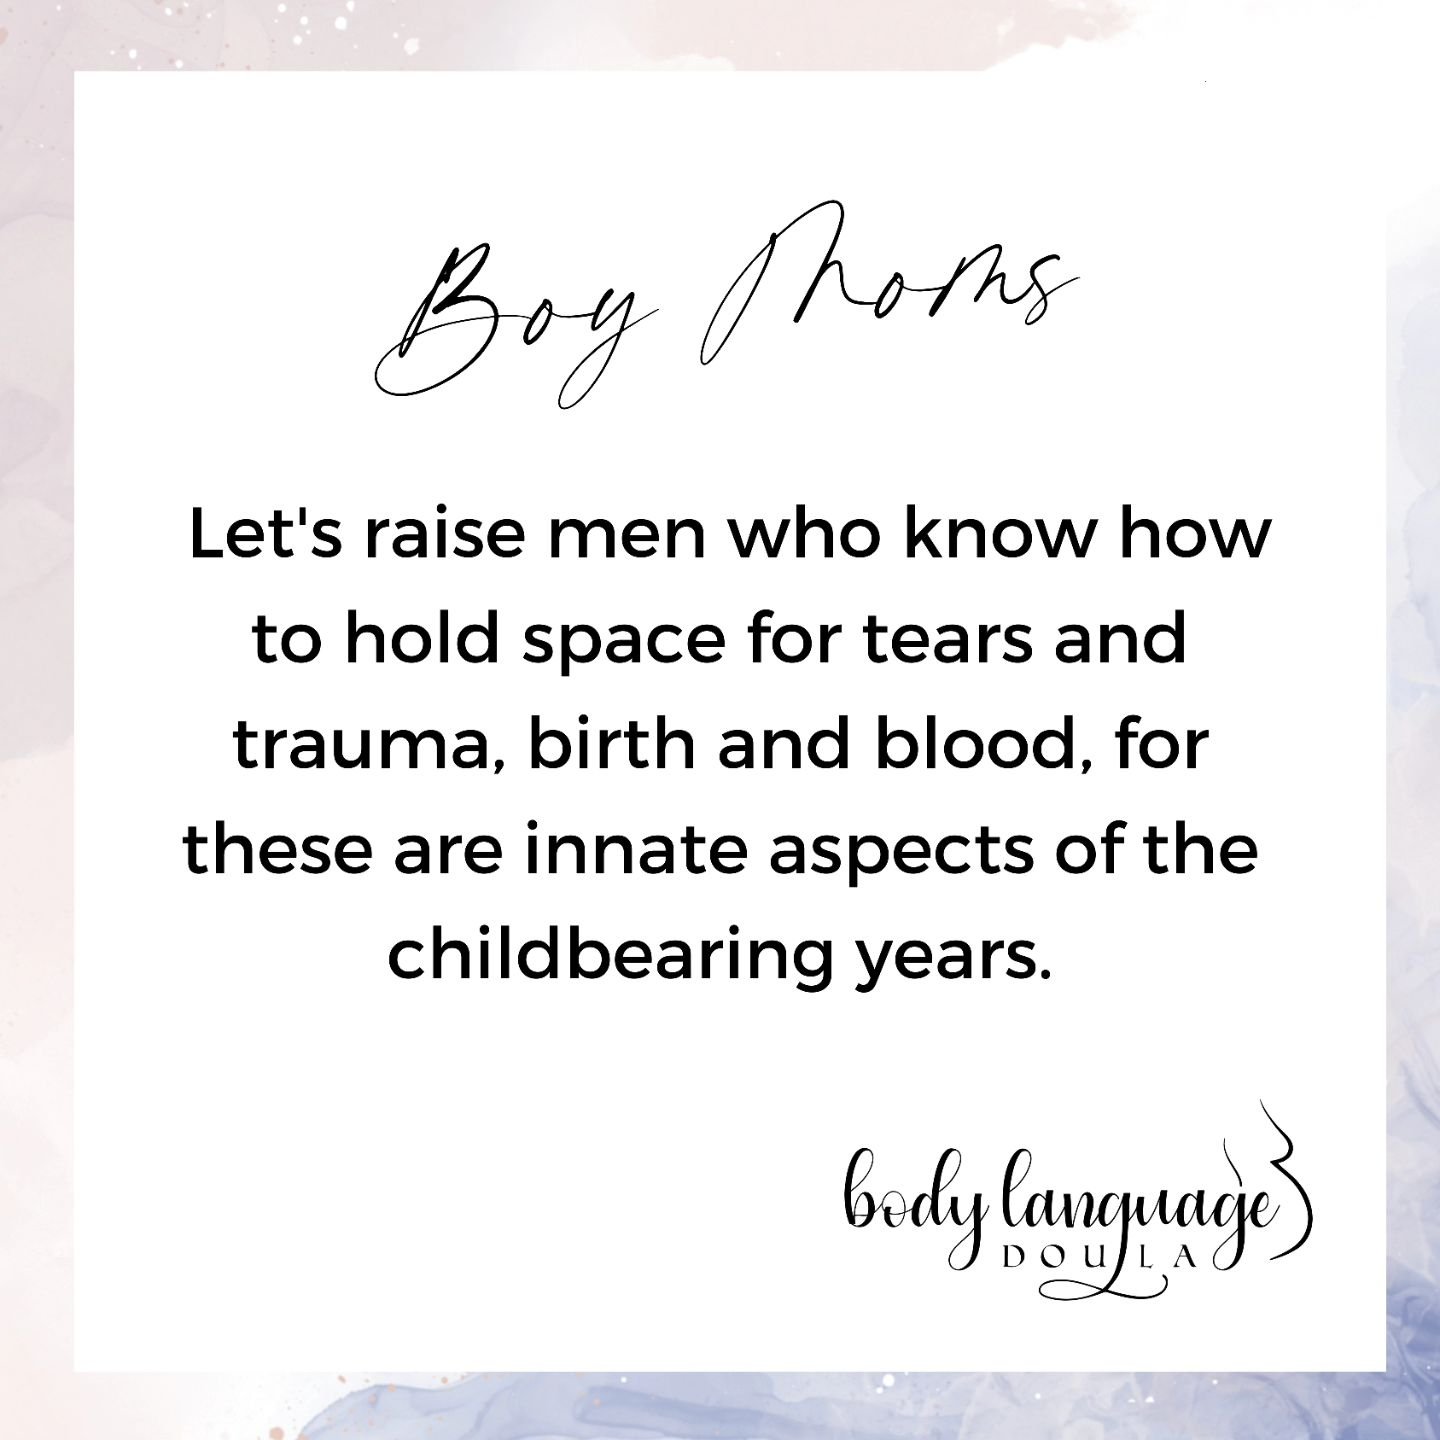 During her childbearing years, a woman is statistically likely to experience loss, grief, trauma, a change in her connection to her blood, and countless amounts of difficult decisions. 🤱

🫂 What if the masculine influences she chooses to support he